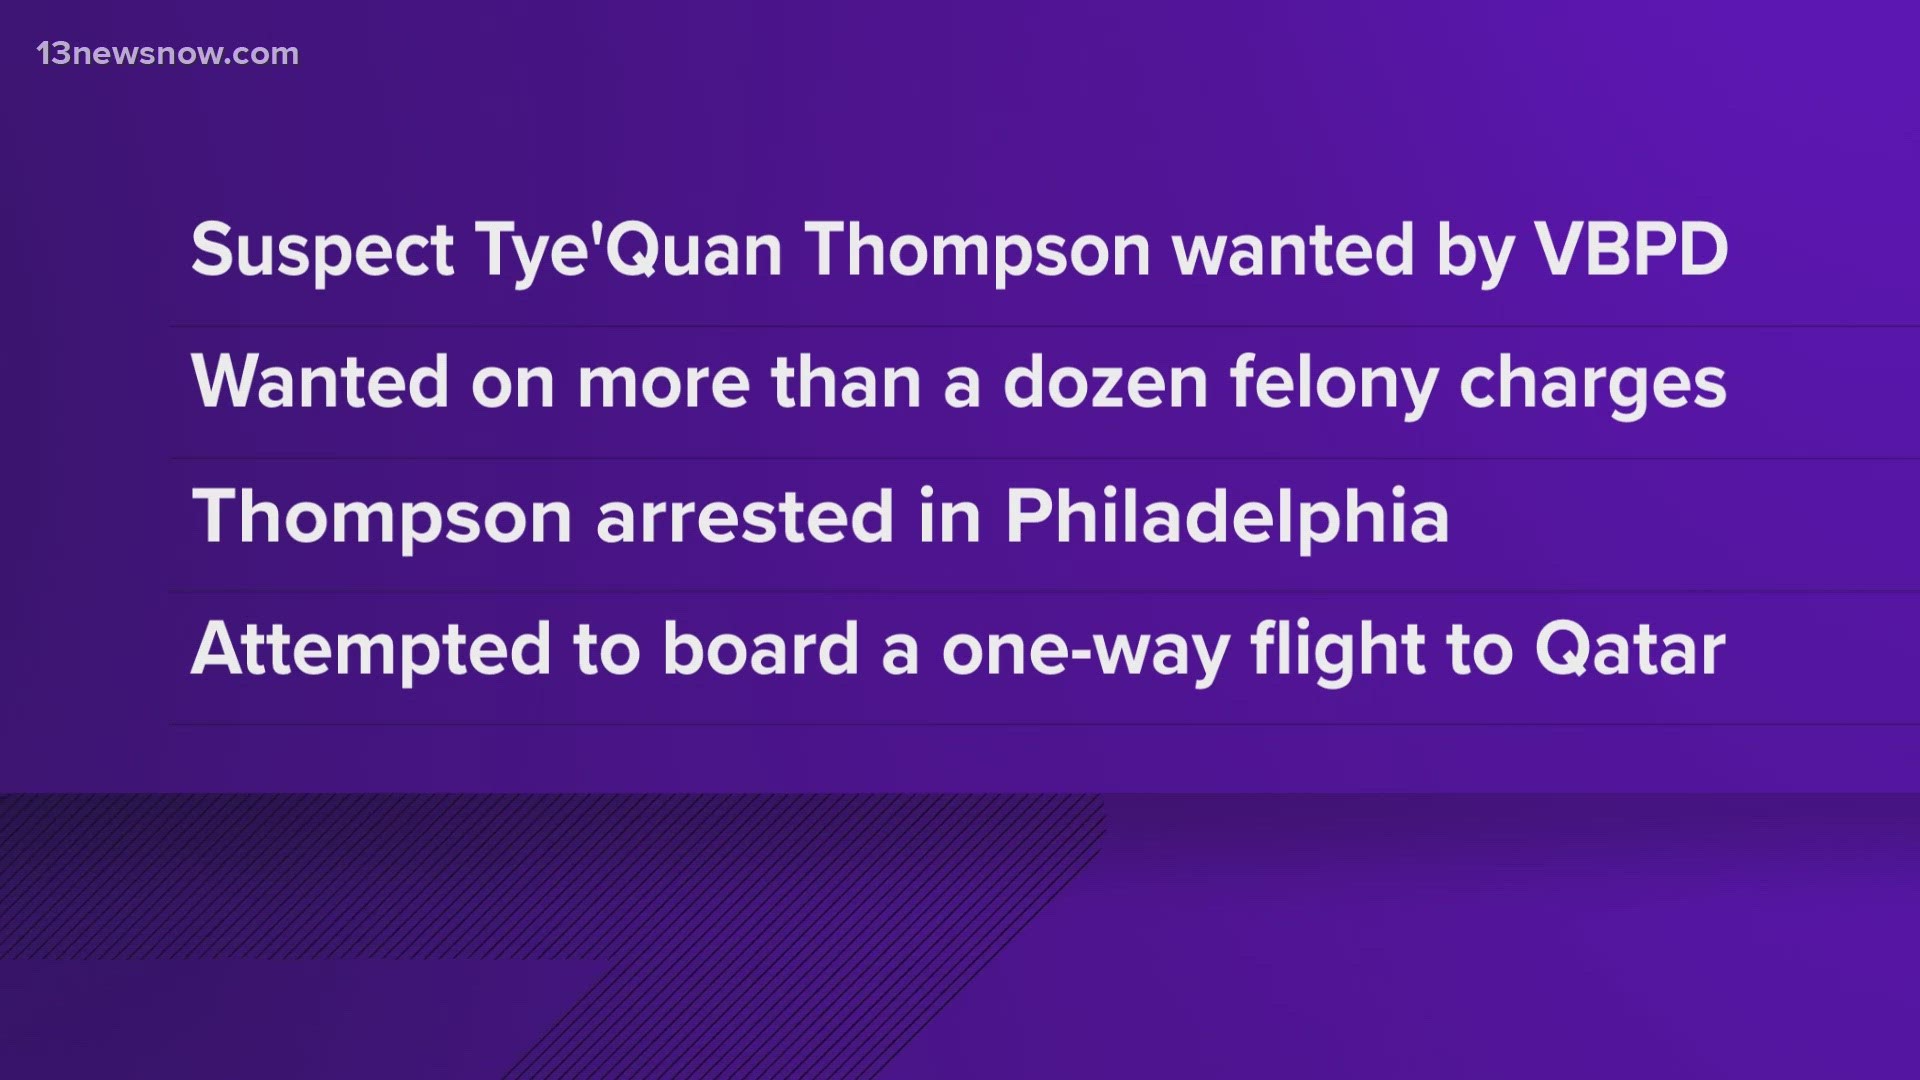 Customs agents say Tye'quan Thompson is wanted on more than a dozen felony charges. Hew was arrested in Philadelphia on his way to Qatar.